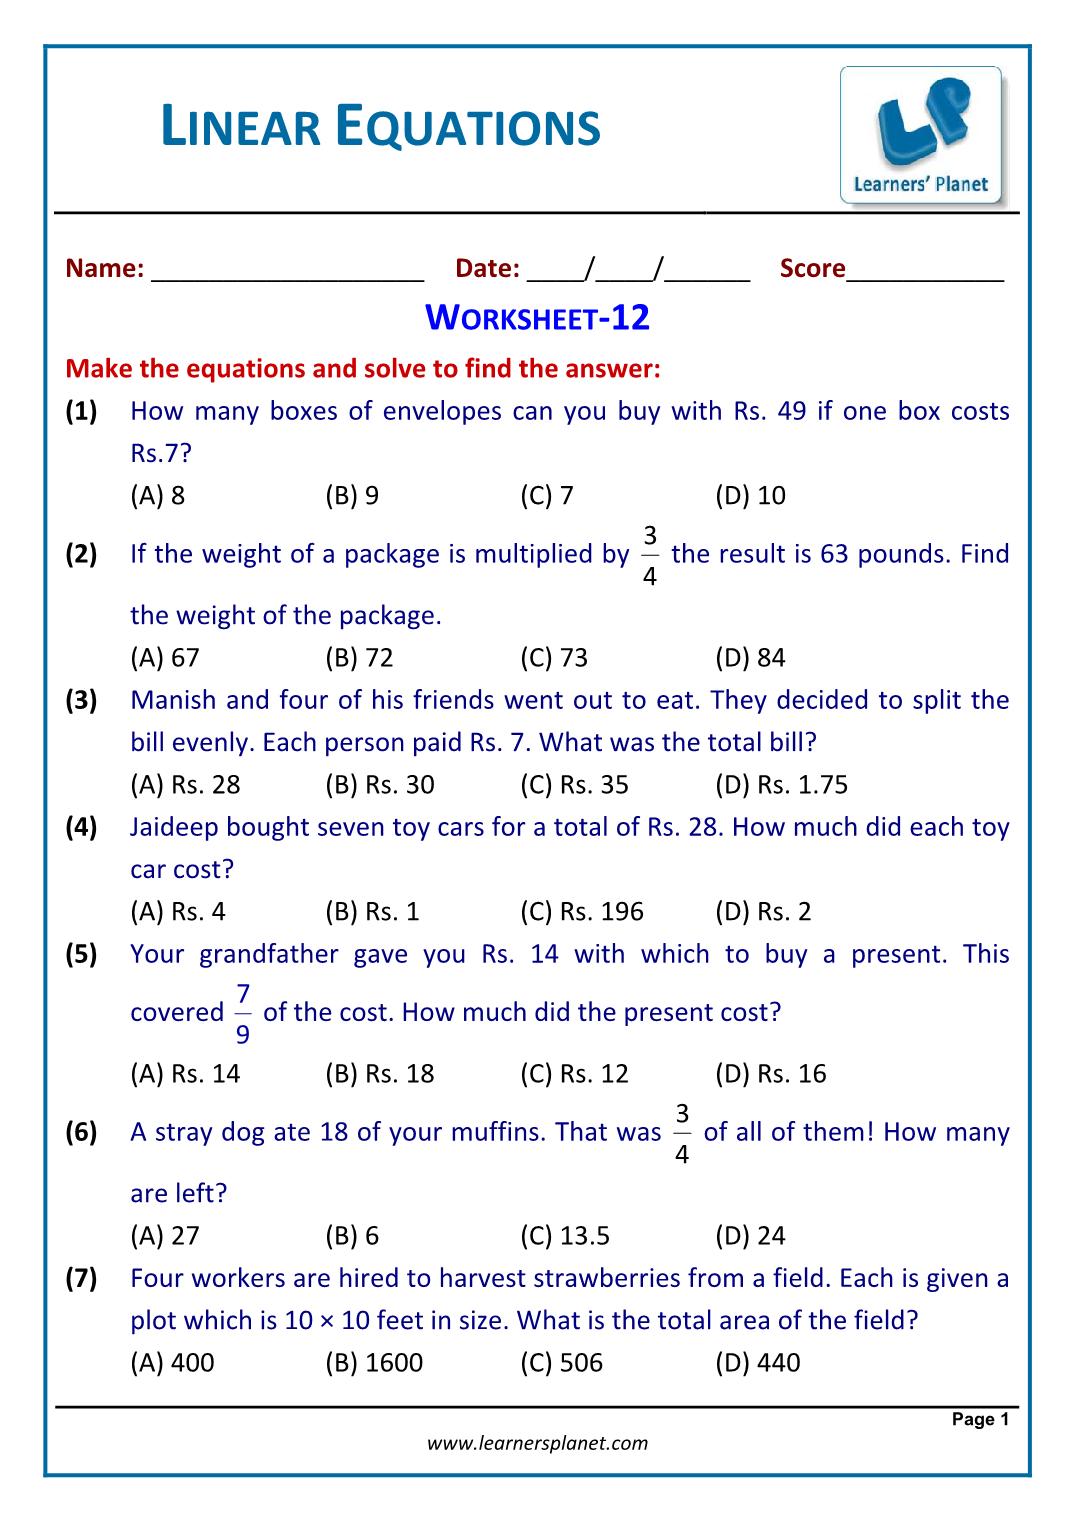 Solve linear equations word problems worksheet grade 22 Pertaining To Equation Word Problems Worksheet